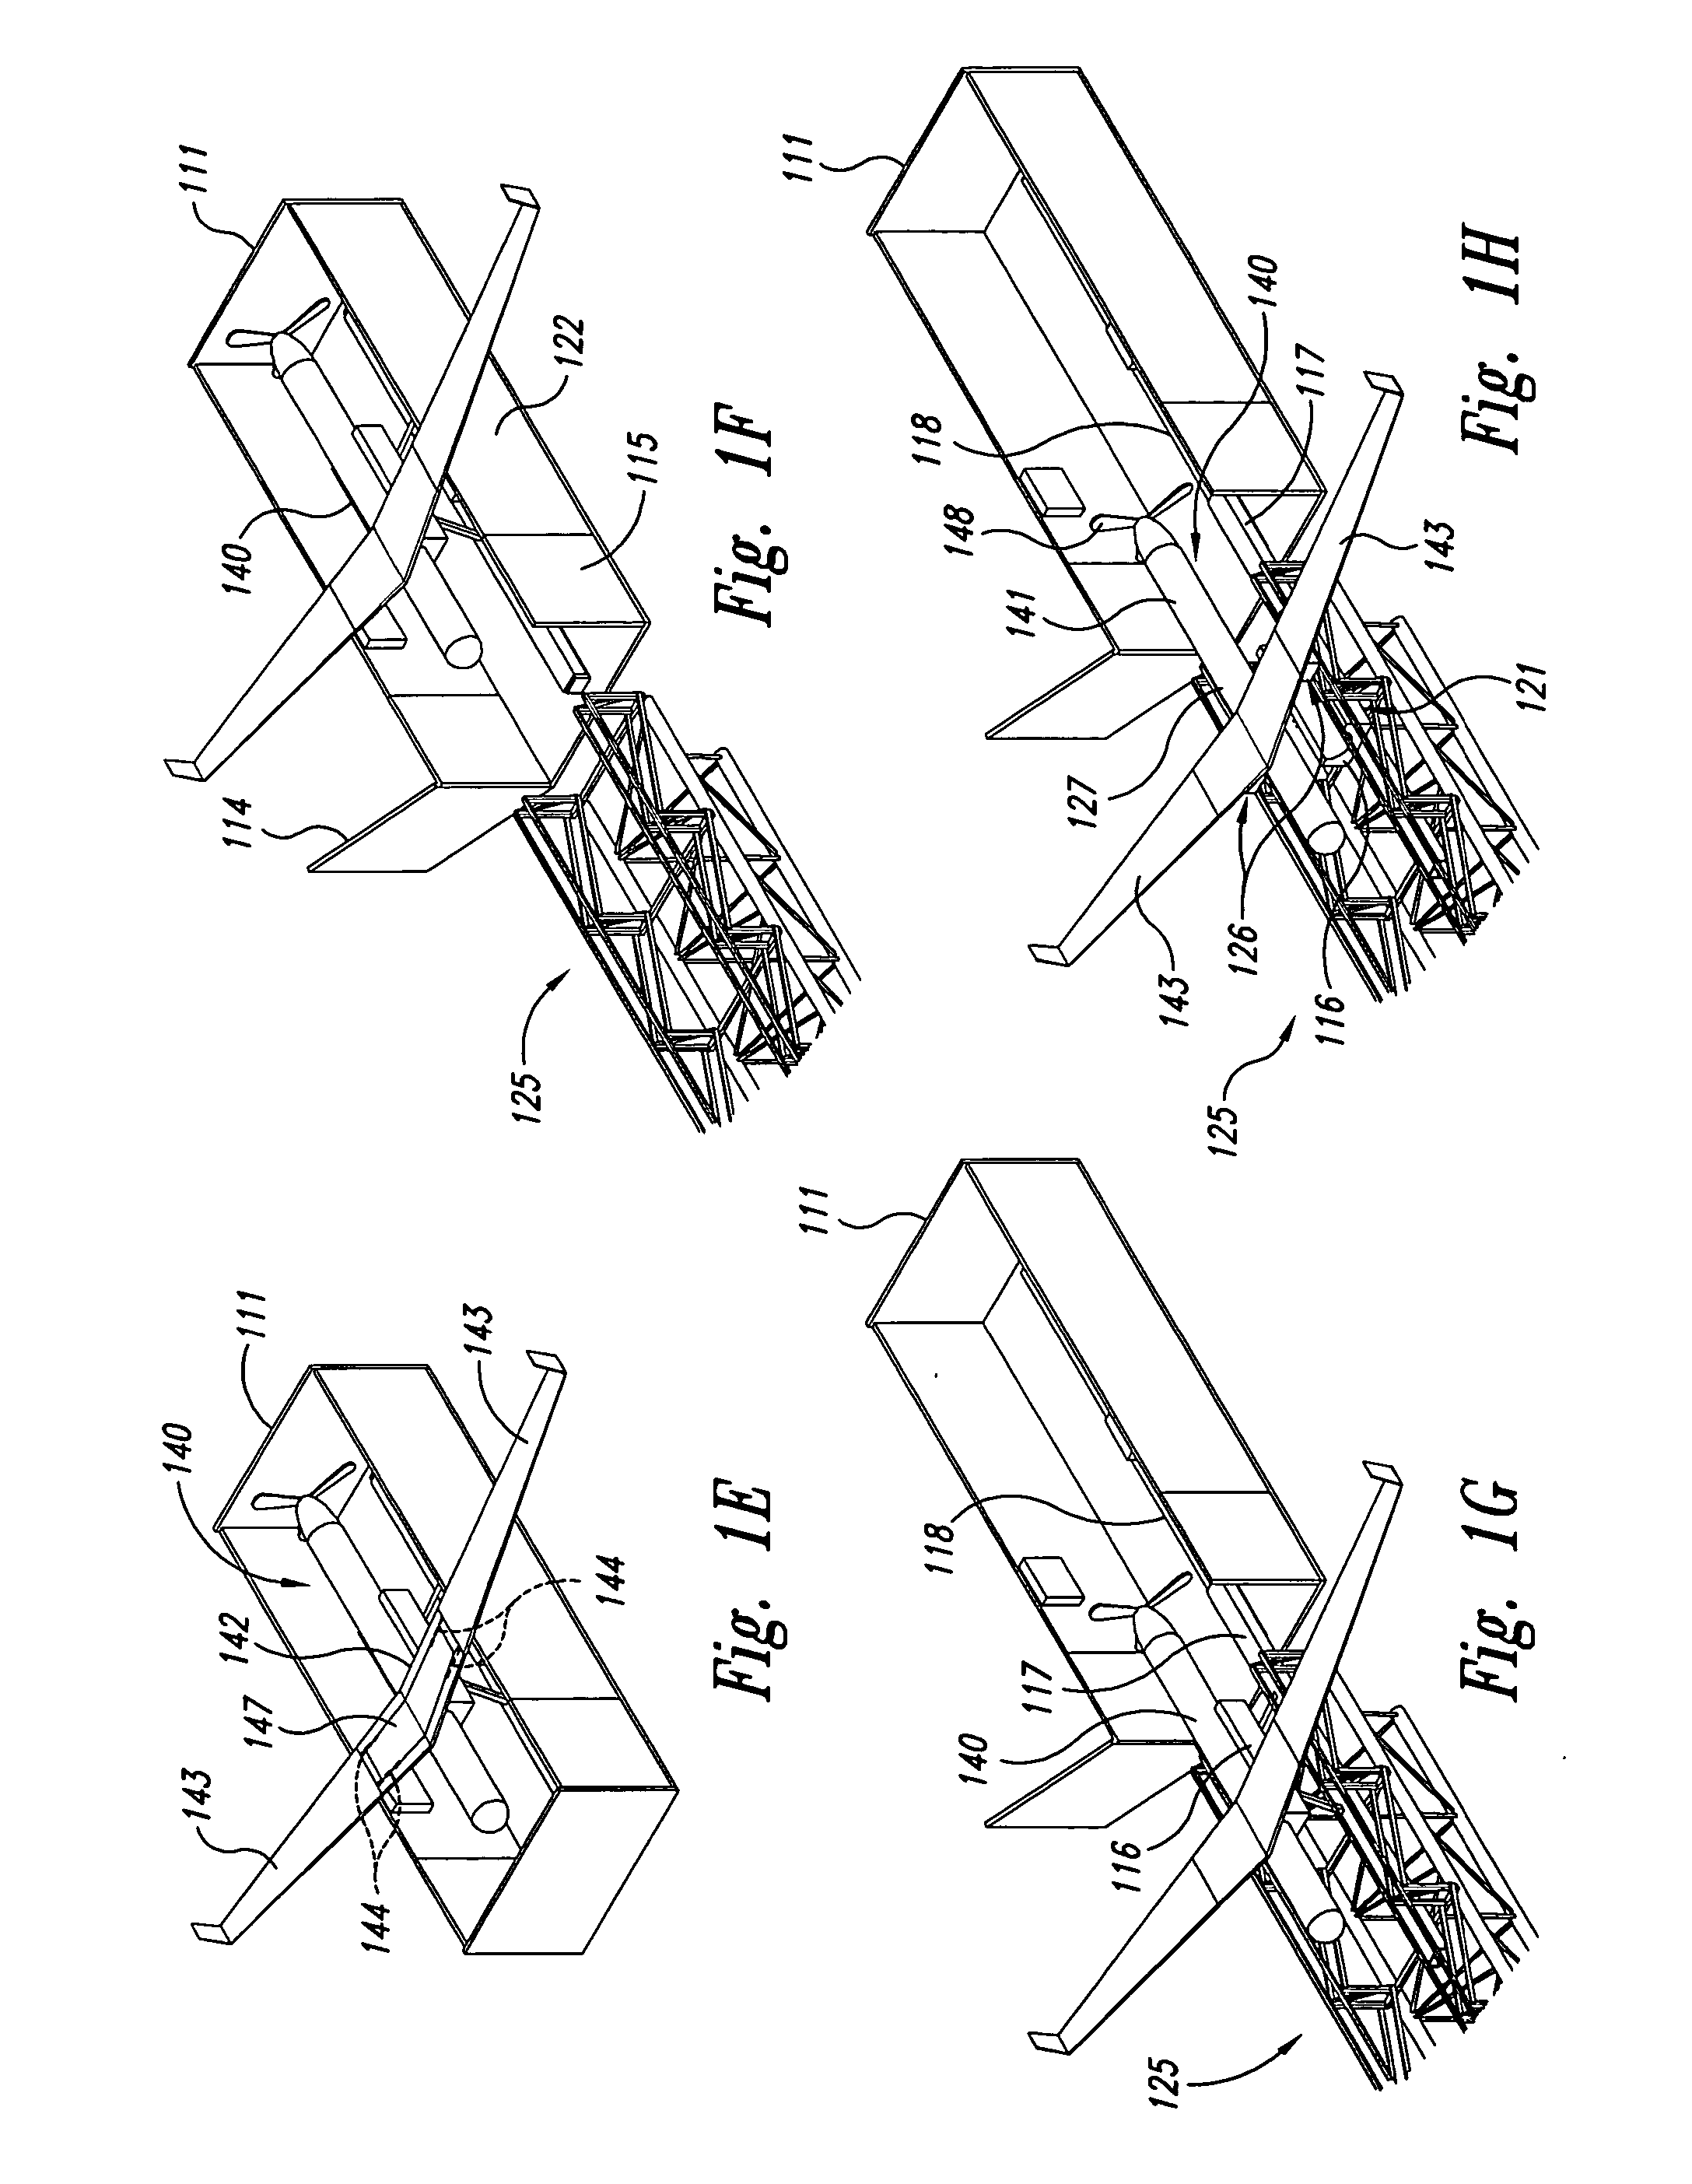 Methods and apparatuses for launching, capturing, and storing unmanned aircraft, including a container having a guide structure for aircraft components